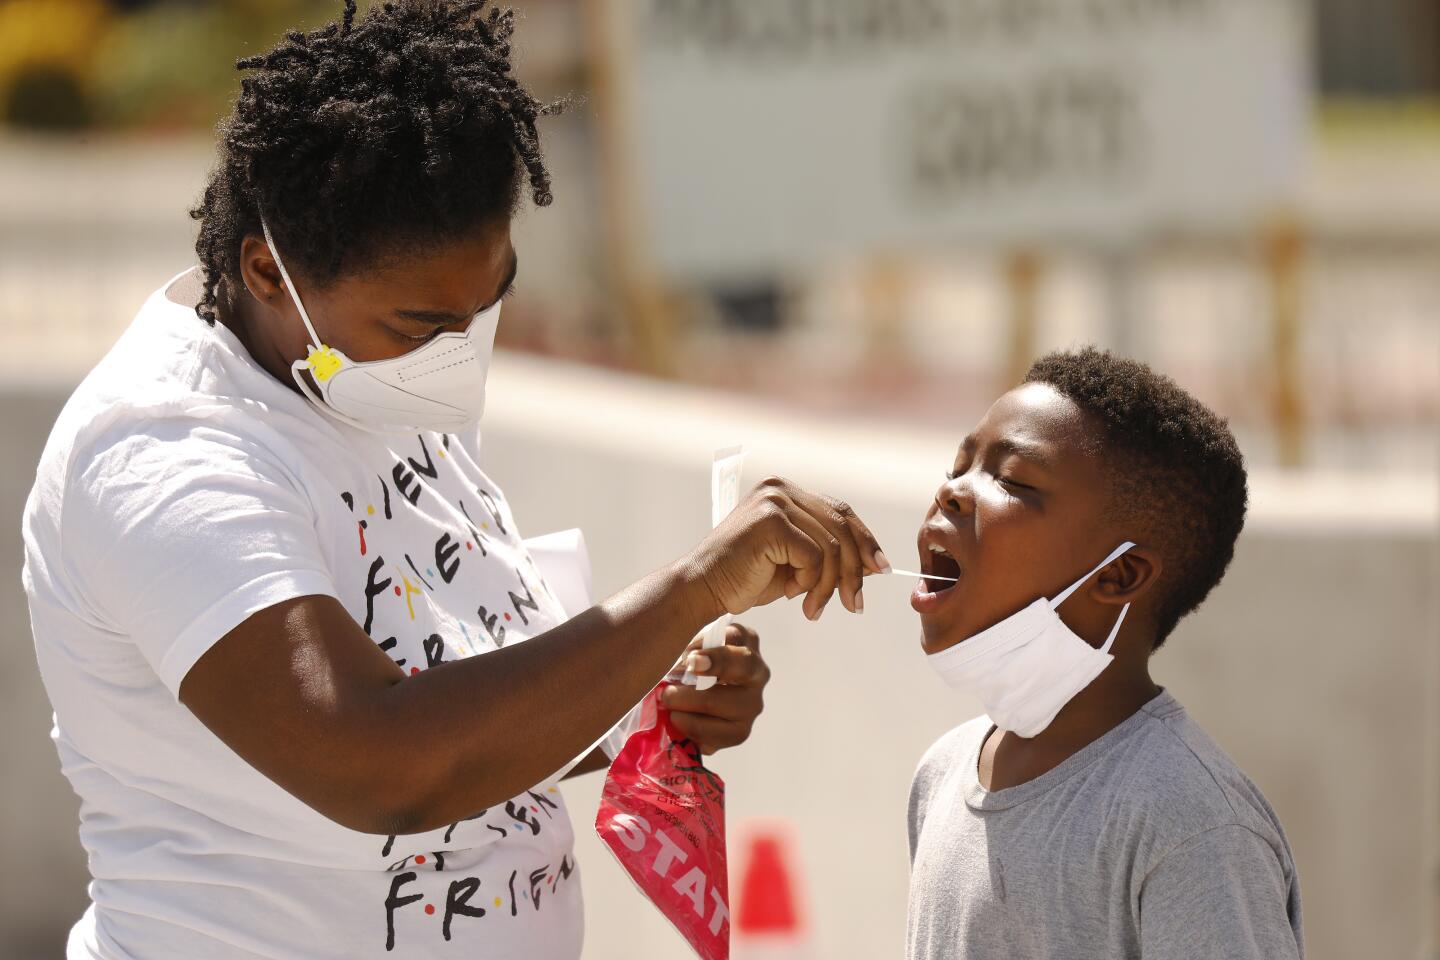 Cynthia Leonard helps her son with an oral swab test at a South L.A. test site.